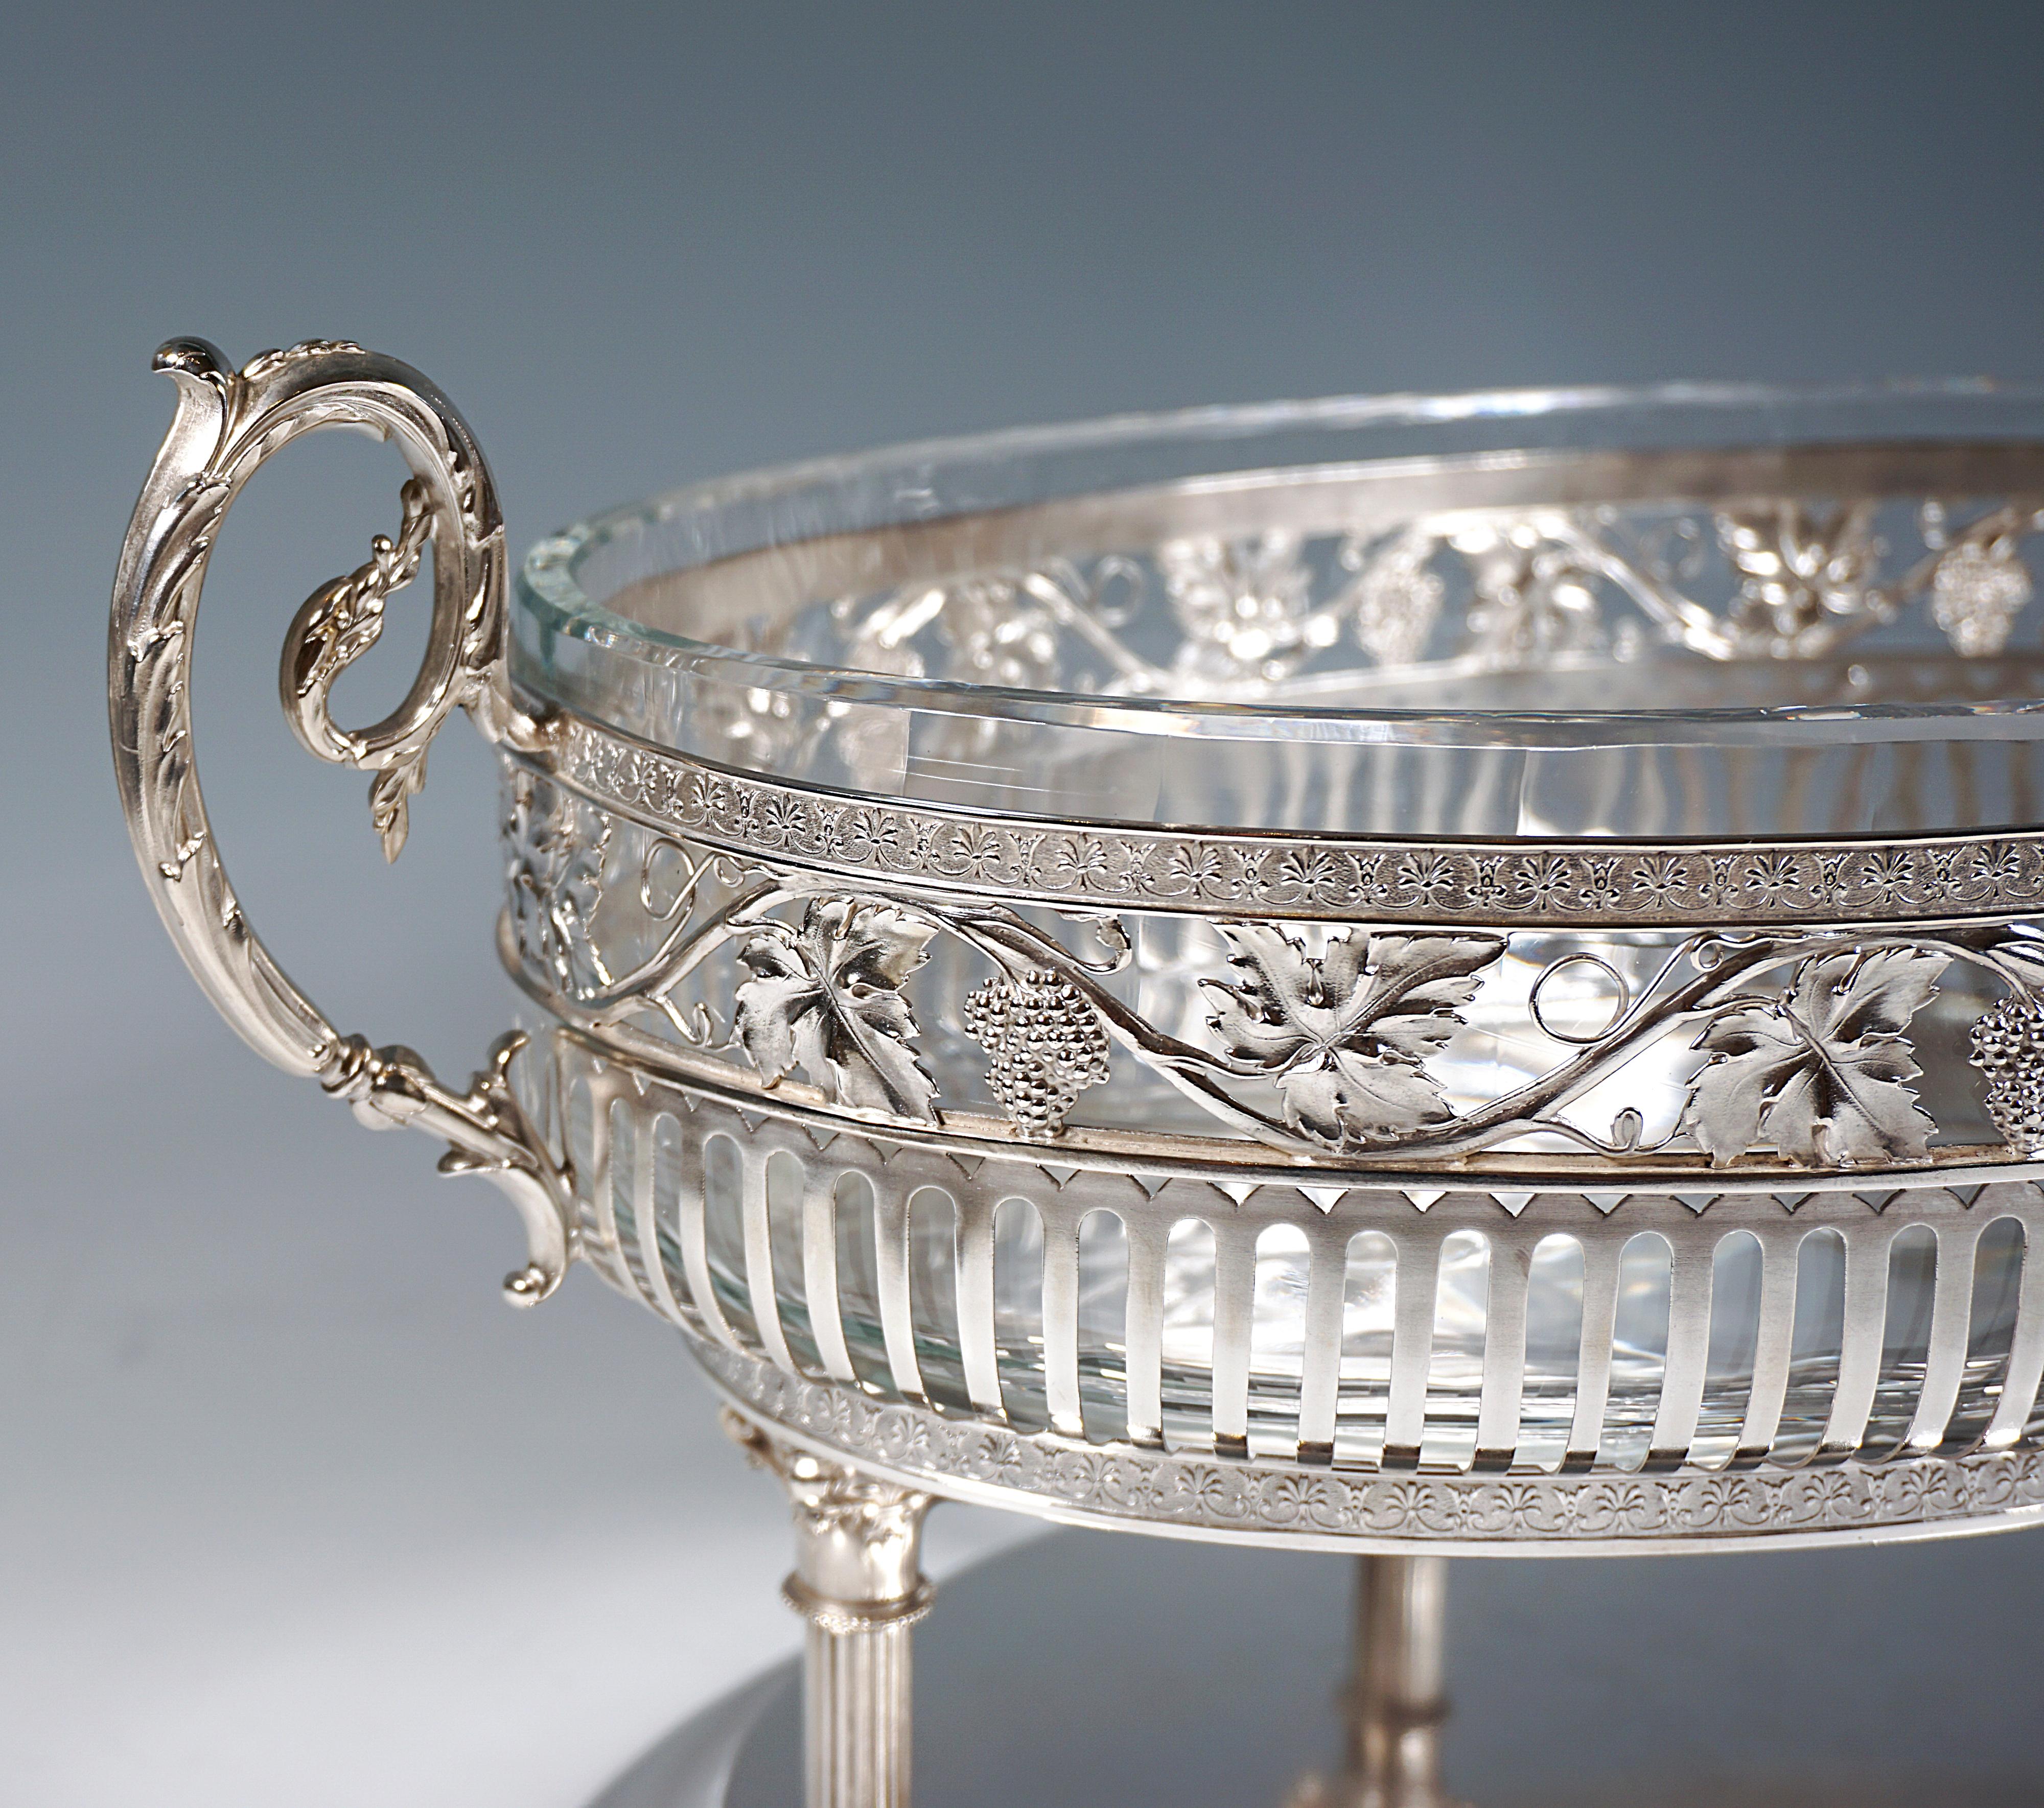 Early 20th Century Large Art Nouveau Silver Centerpiece on Columns, by Bruckmann & Sons, Germany For Sale